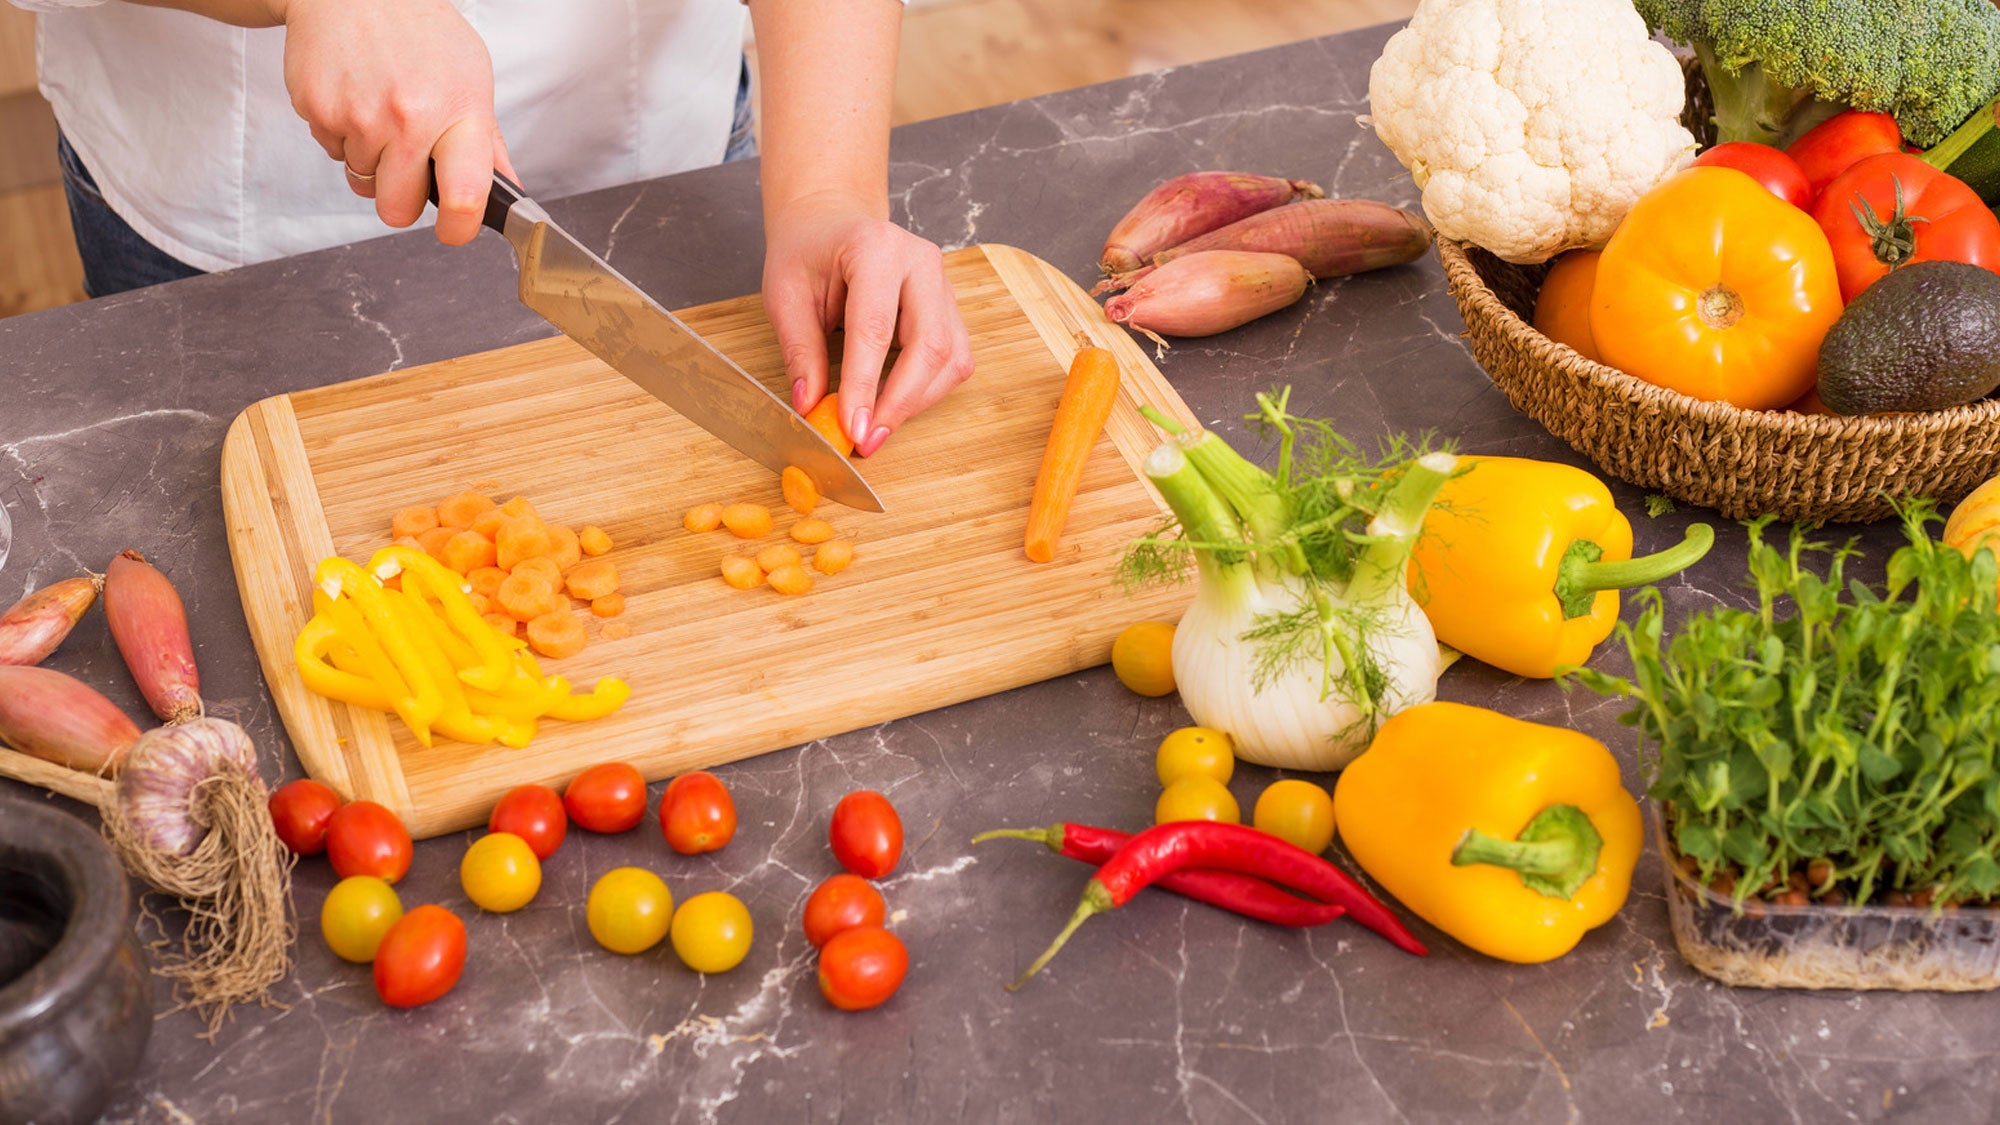 How To Oil A Cutting Board Or Butcher Block: The Ultimate Guide